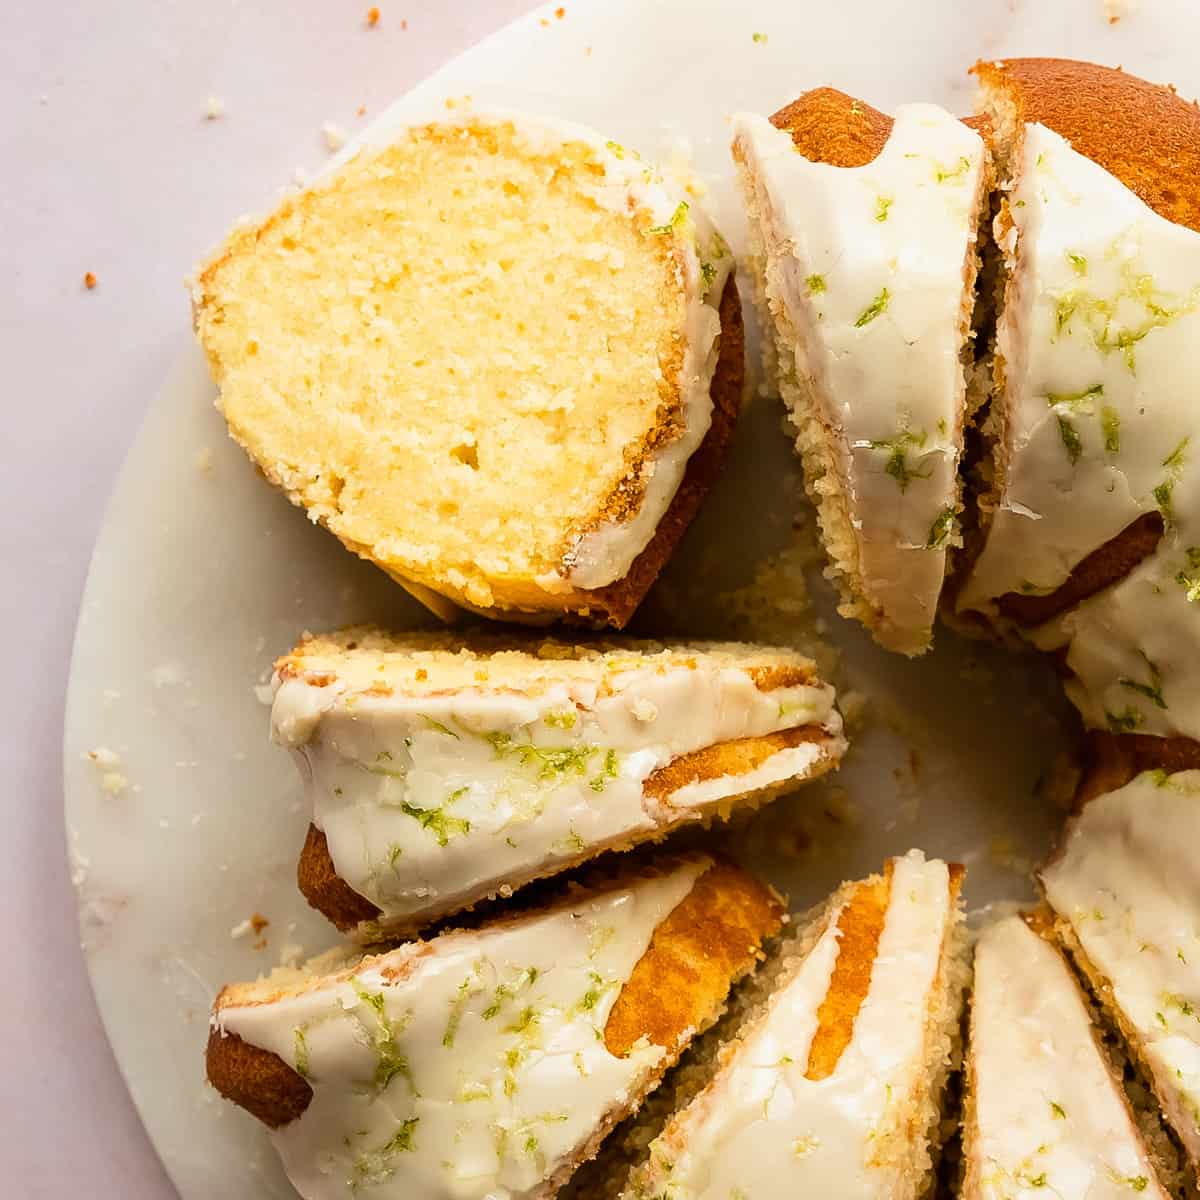 This key lime pound cake is a decadent, rich and buttery pound cake filled with key lime flavor. Top with this lime pound cake with a deliciously tart and sweet key lime glaze. Enjoy this easy to make, tropical twist on the classic southern pound cake for breakfast, brunch or dessert. 